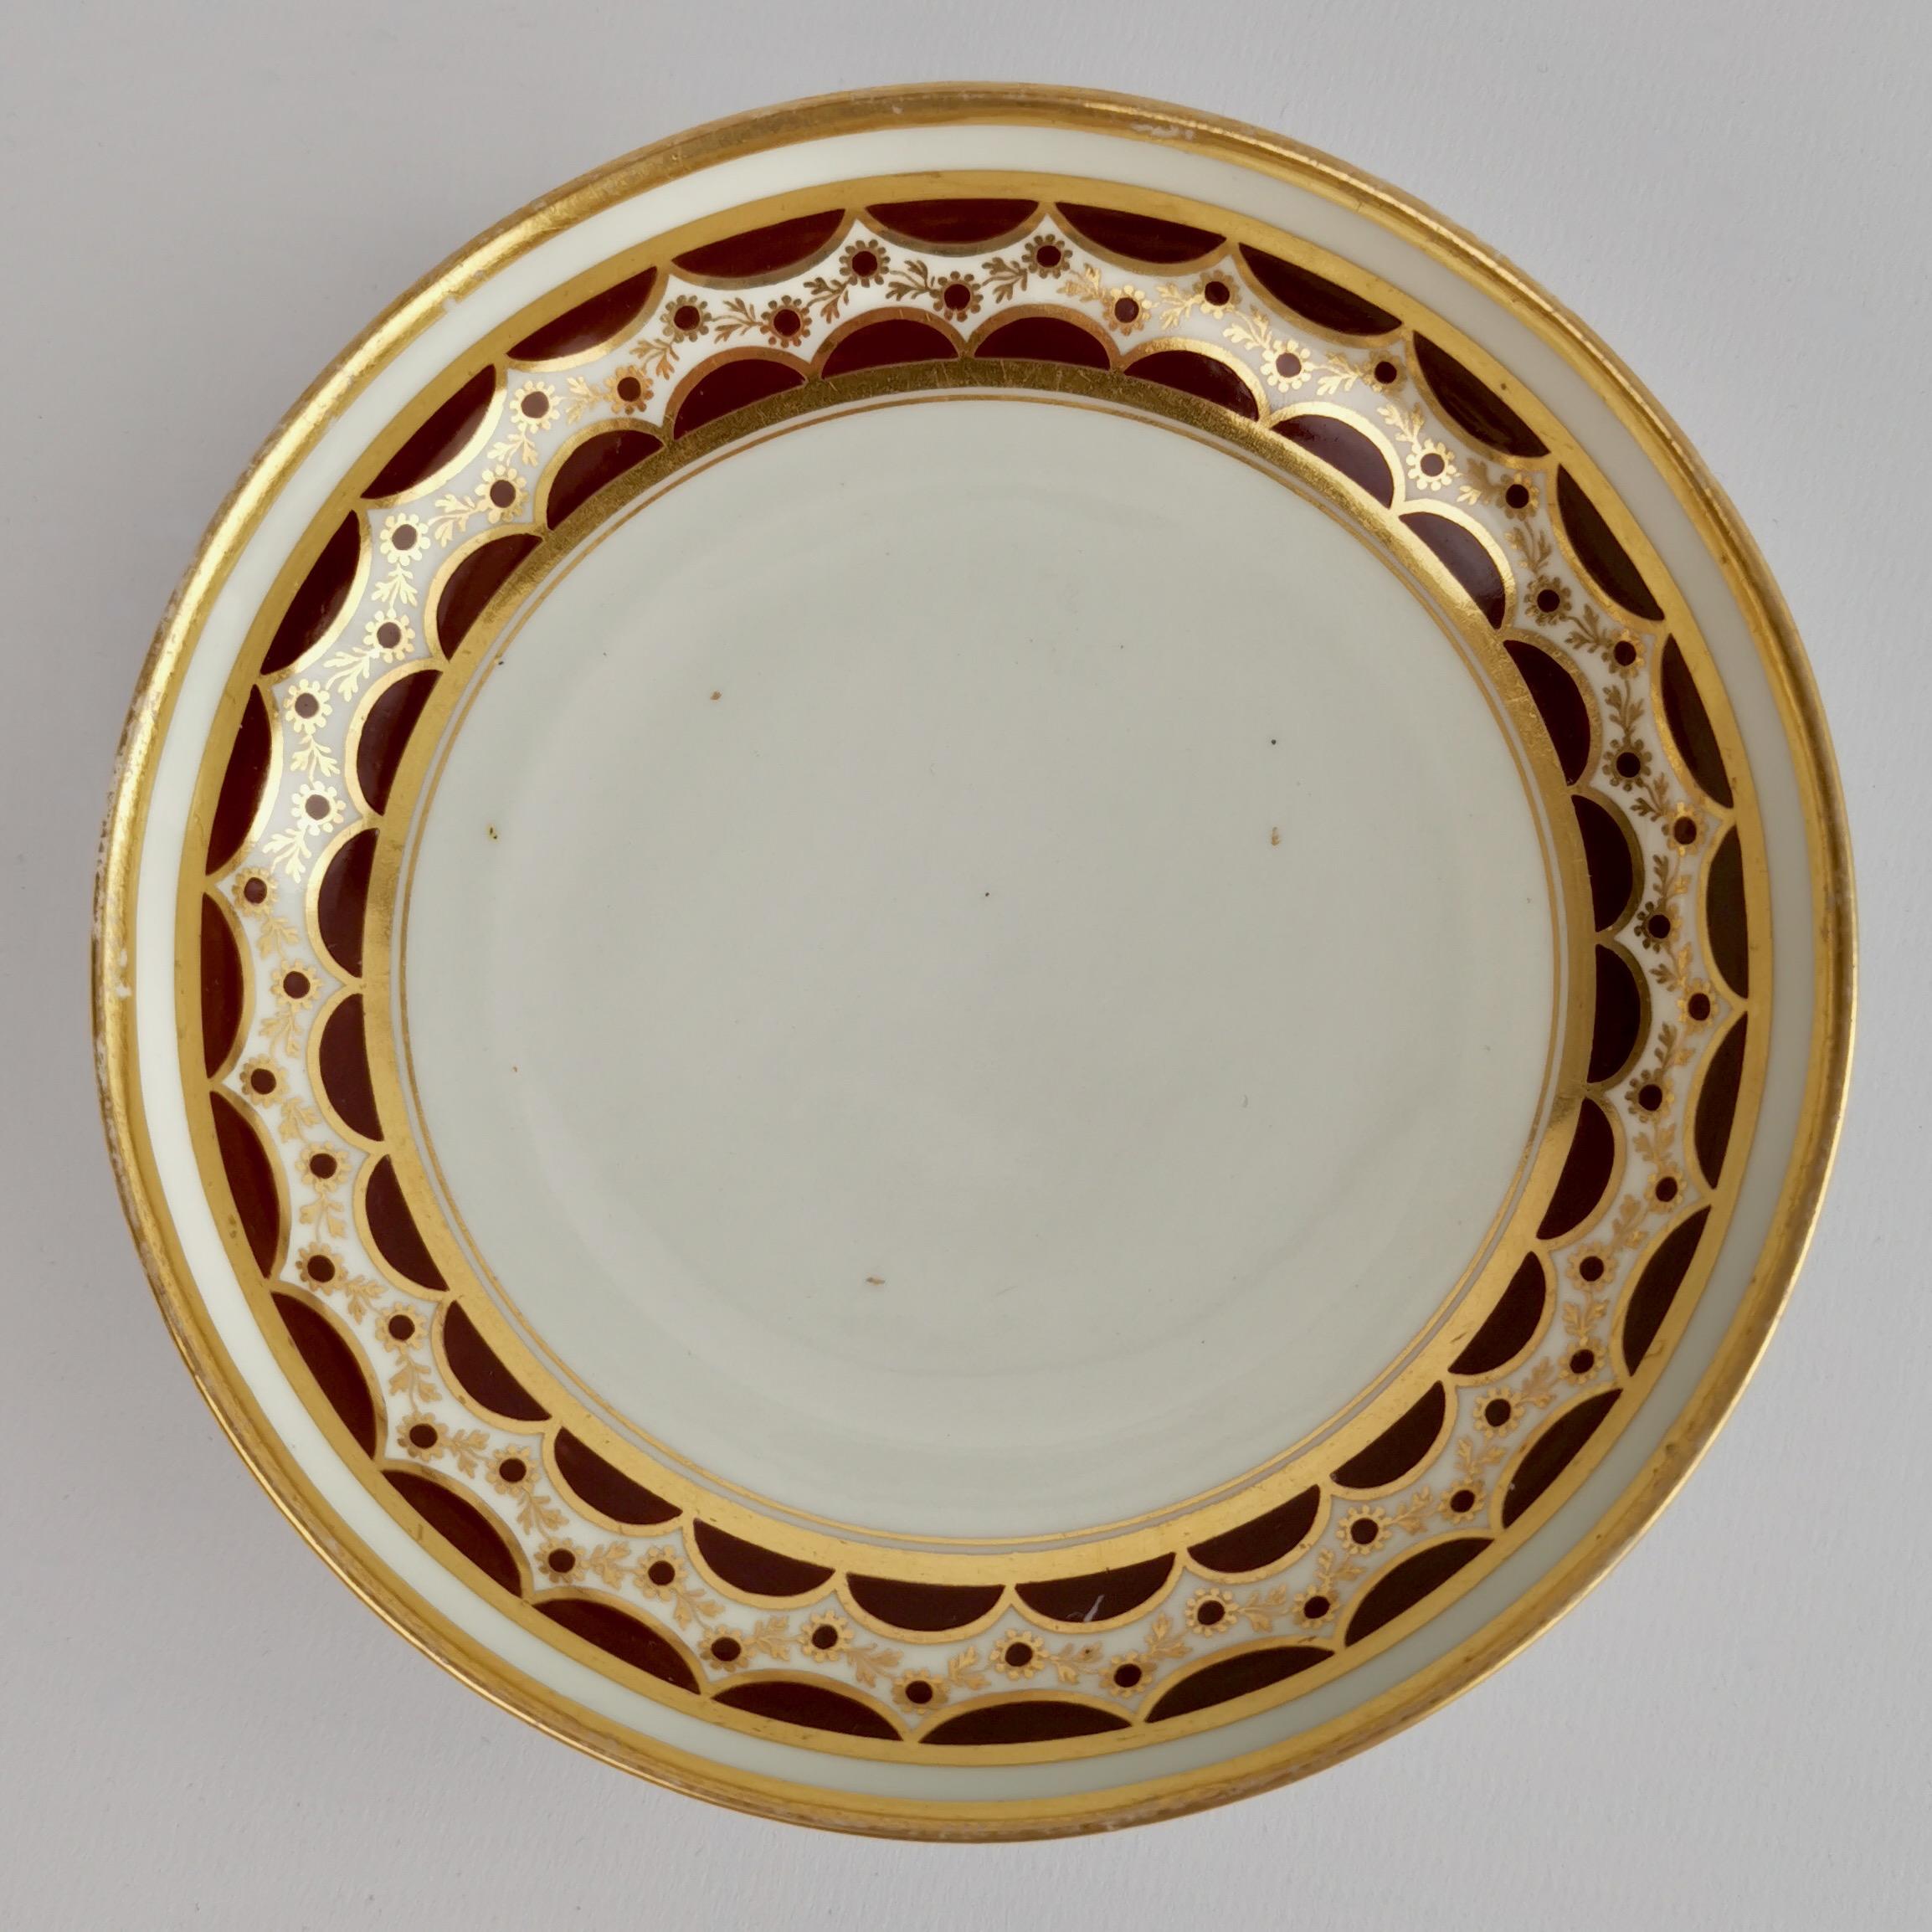 Hand-Painted Flight & Barr Porcelain Teacup Trio, Brown and Gilt Pattern, Georgian, 1792-1804 For Sale